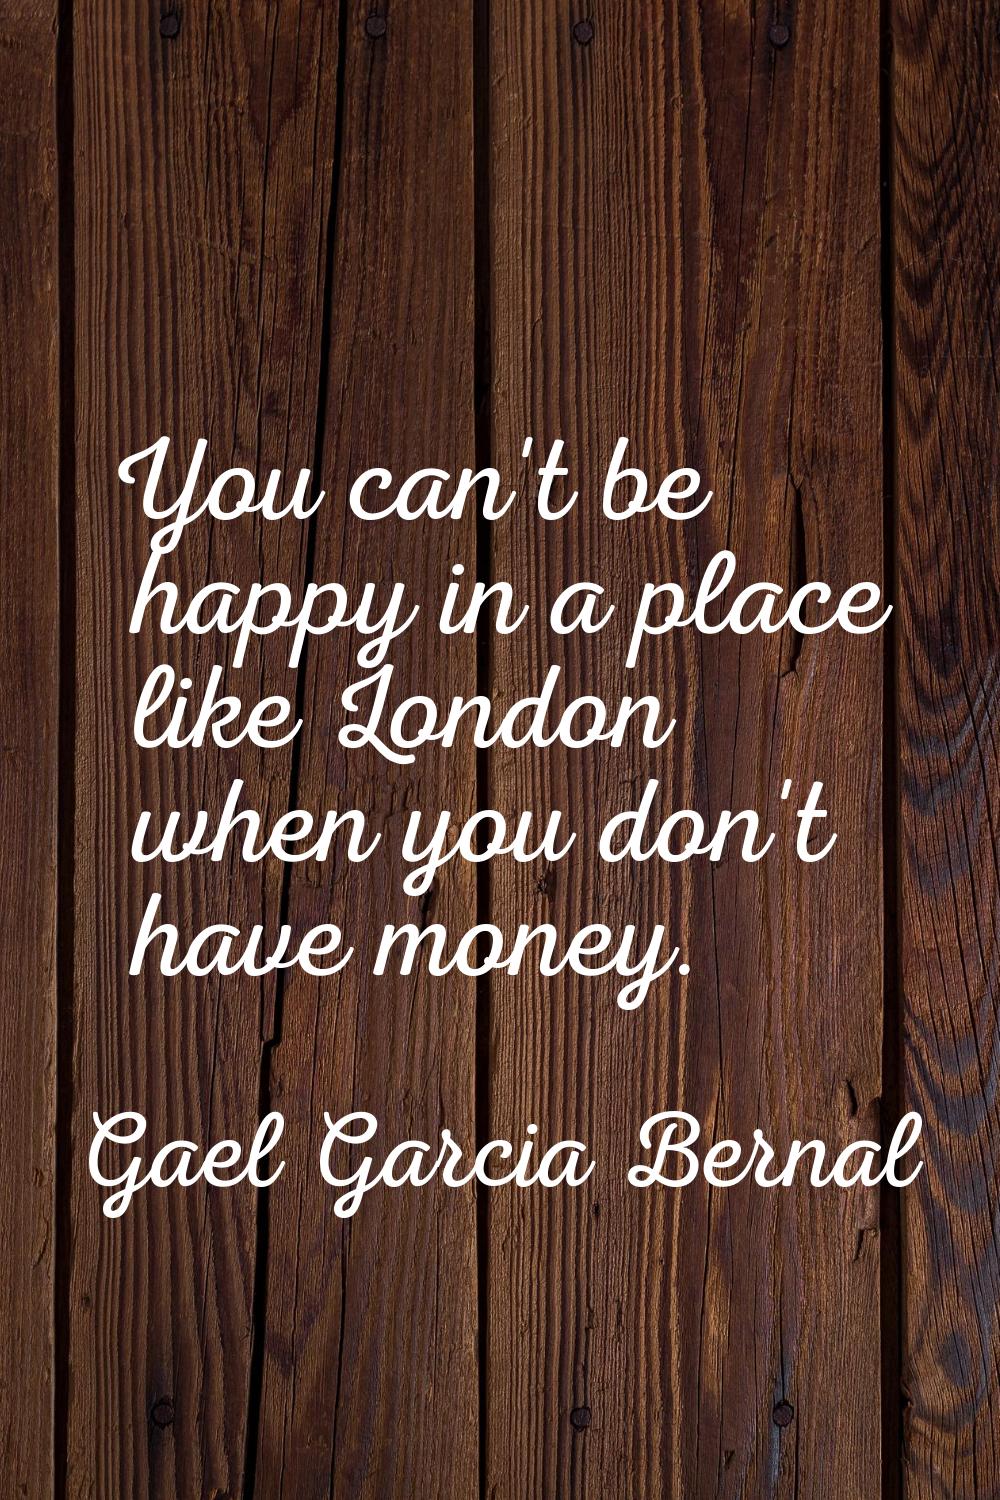 You can't be happy in a place like London when you don't have money.